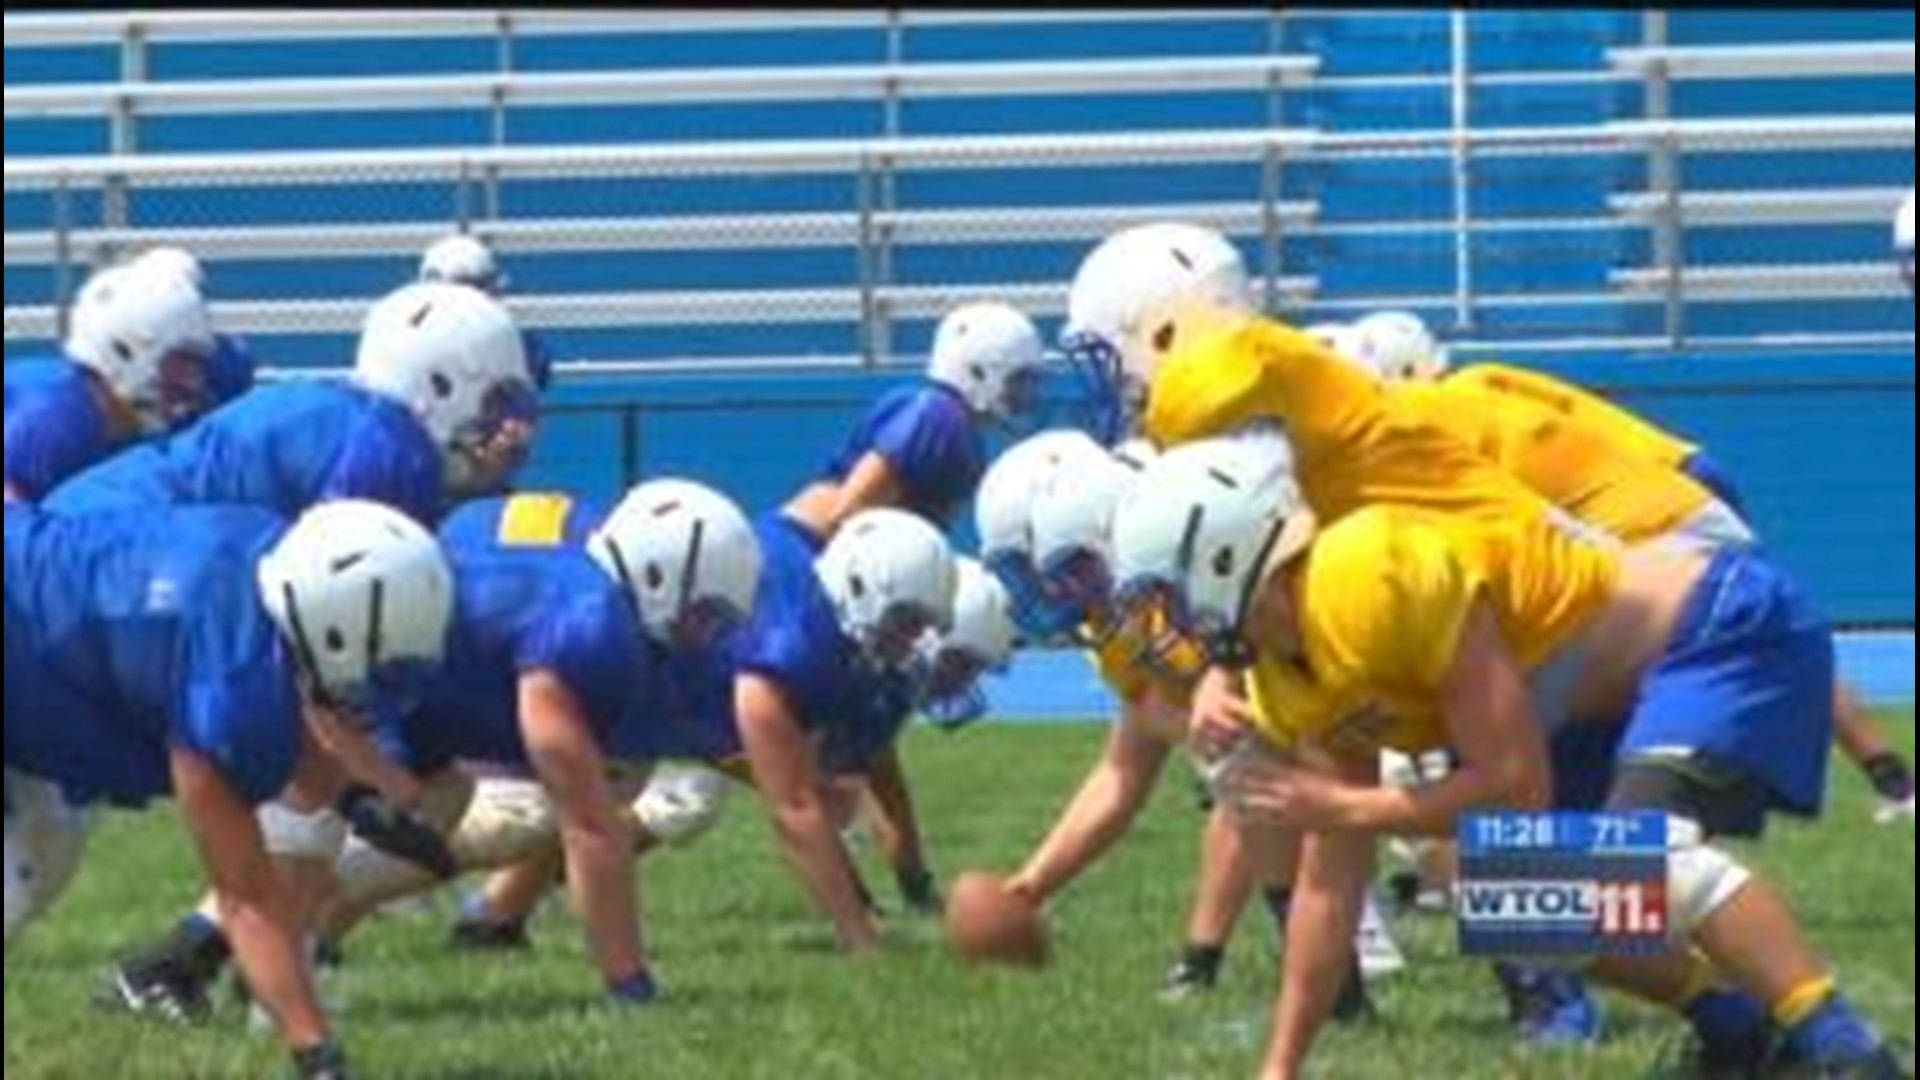 Findlay looking to return to playoffs for second straight year